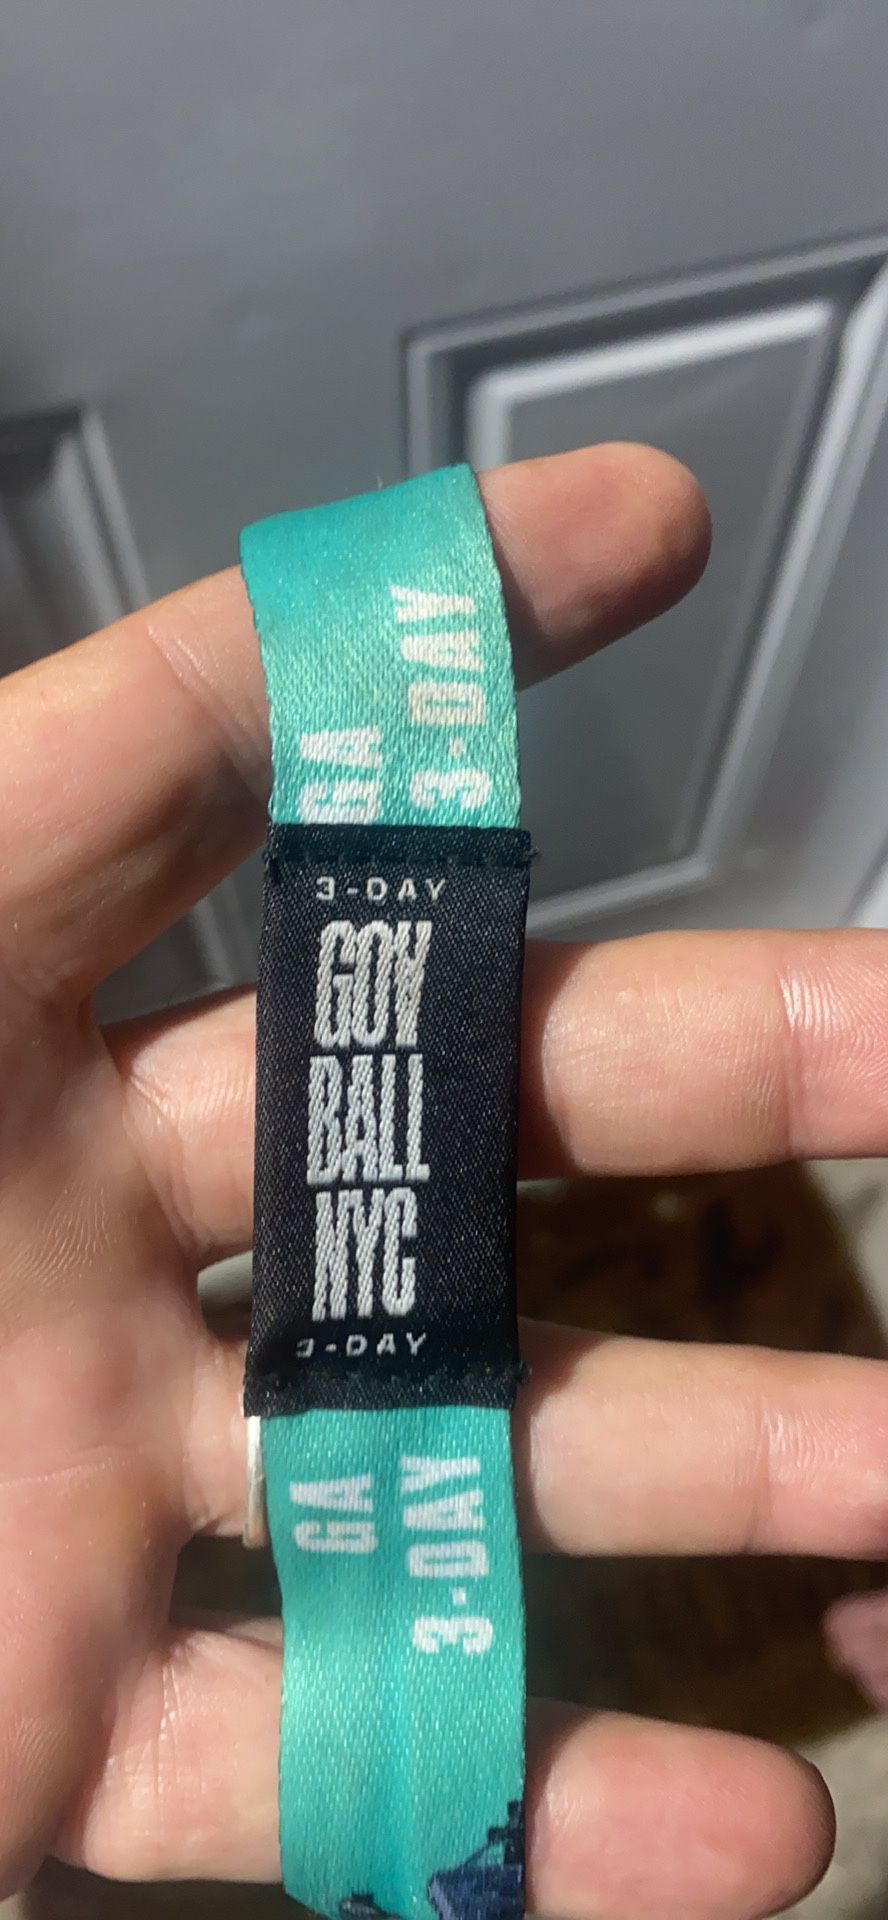 Governors Ball 3 Day Wrist Band Today And Tomorrow  Left 